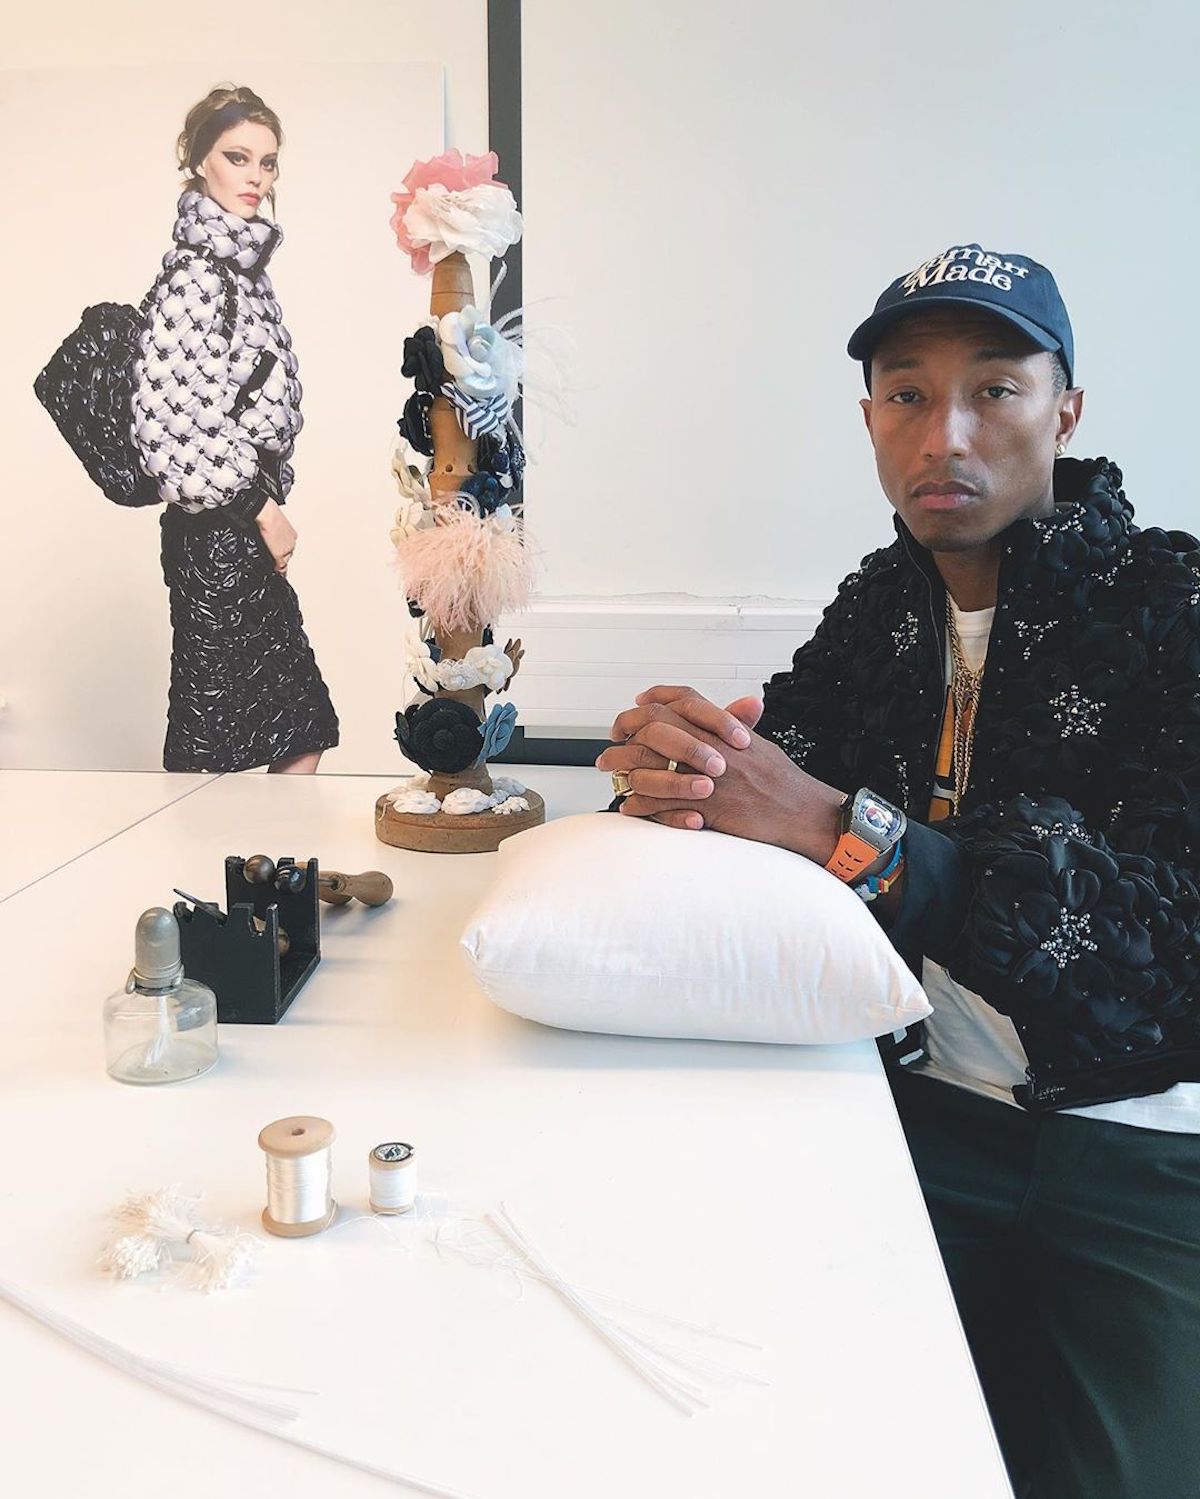 SPOTTED: Pharrell Williams Drops by Chanel HQ in Chanel & Richard Mille